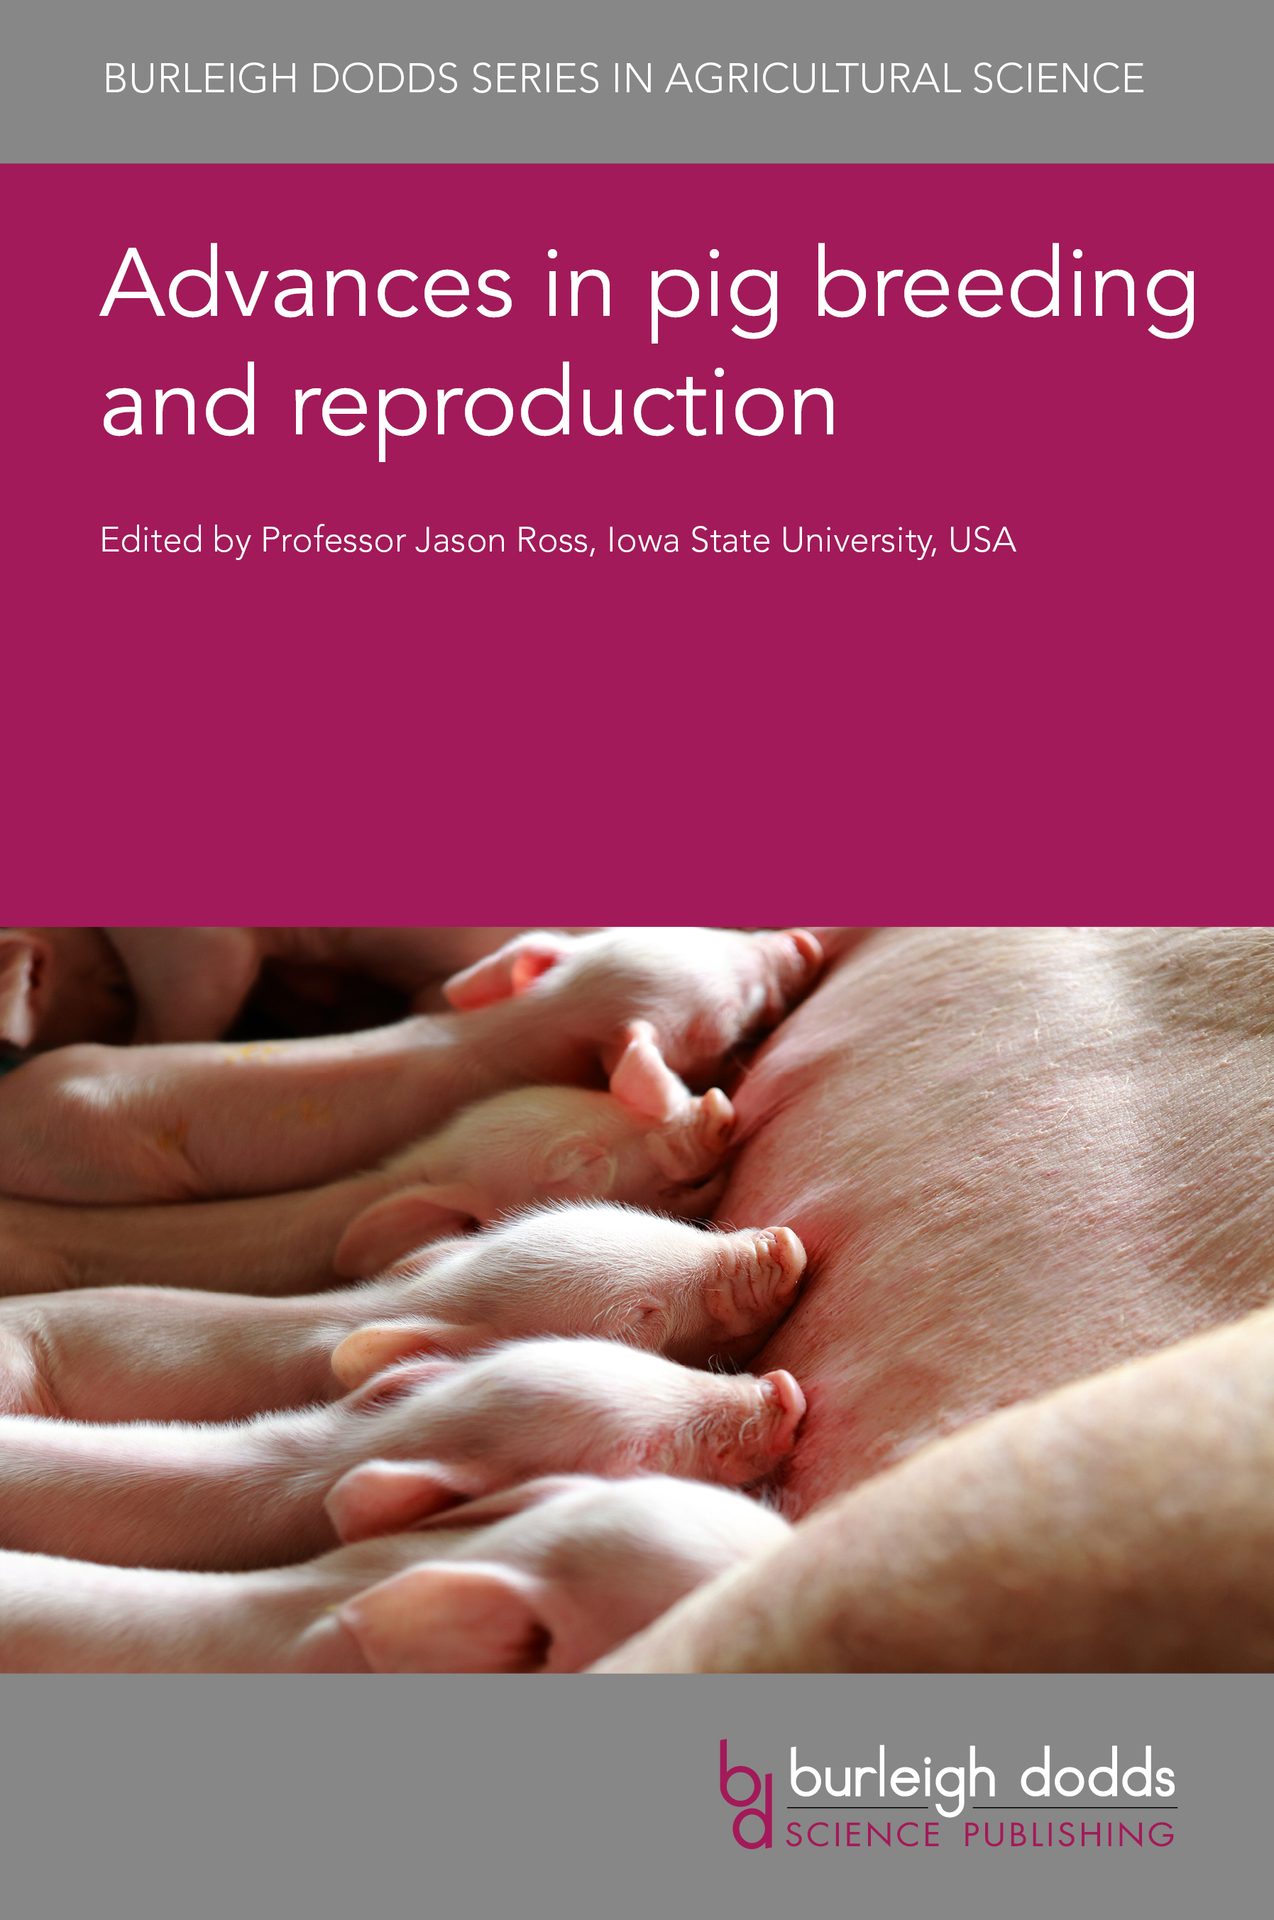 Advances in pig breeding and reproduction